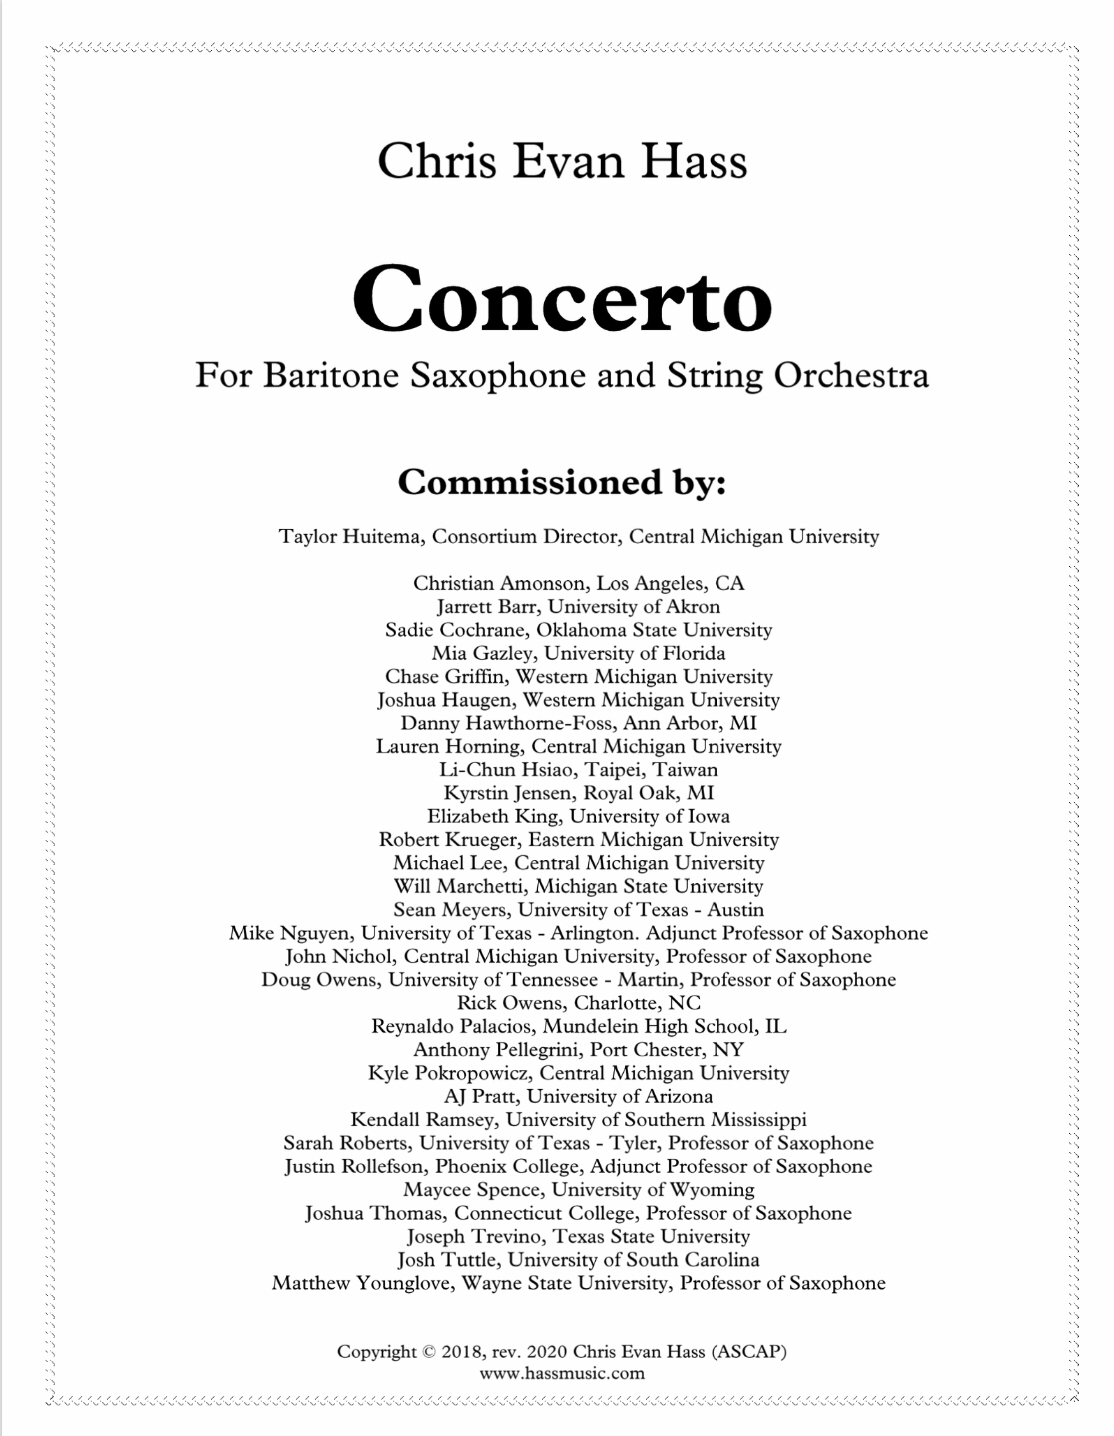 Concerto For Baritone Saxophone And String Orchestra by Chris Evan Hass